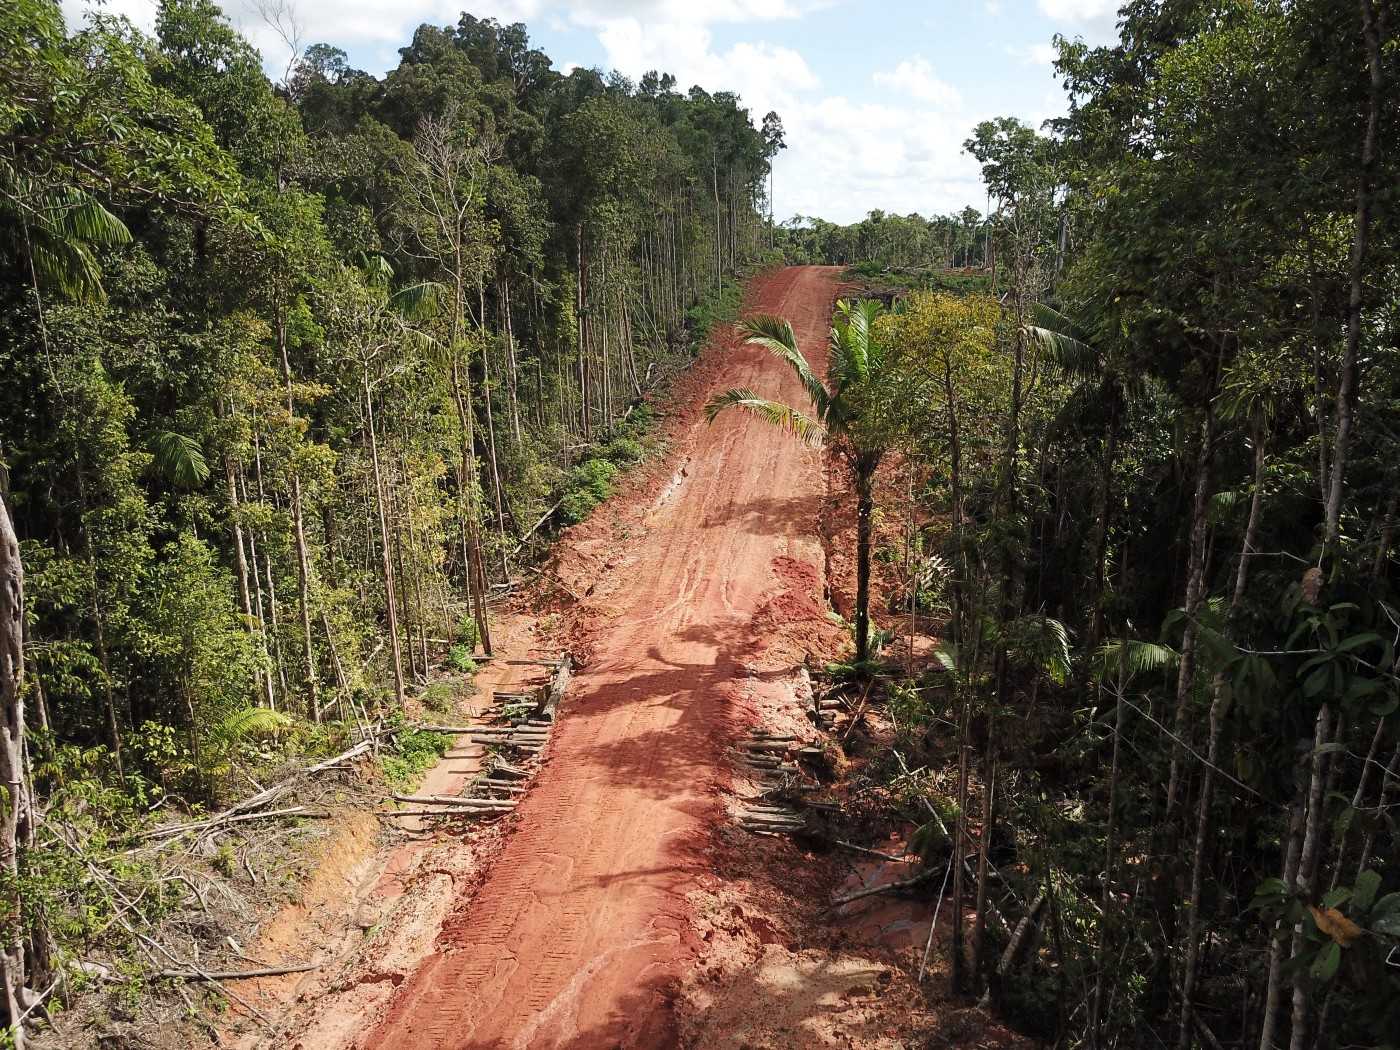 A road in Digoel Agri Group’s concession. Photo courtesy of Pusaka, January 2020.